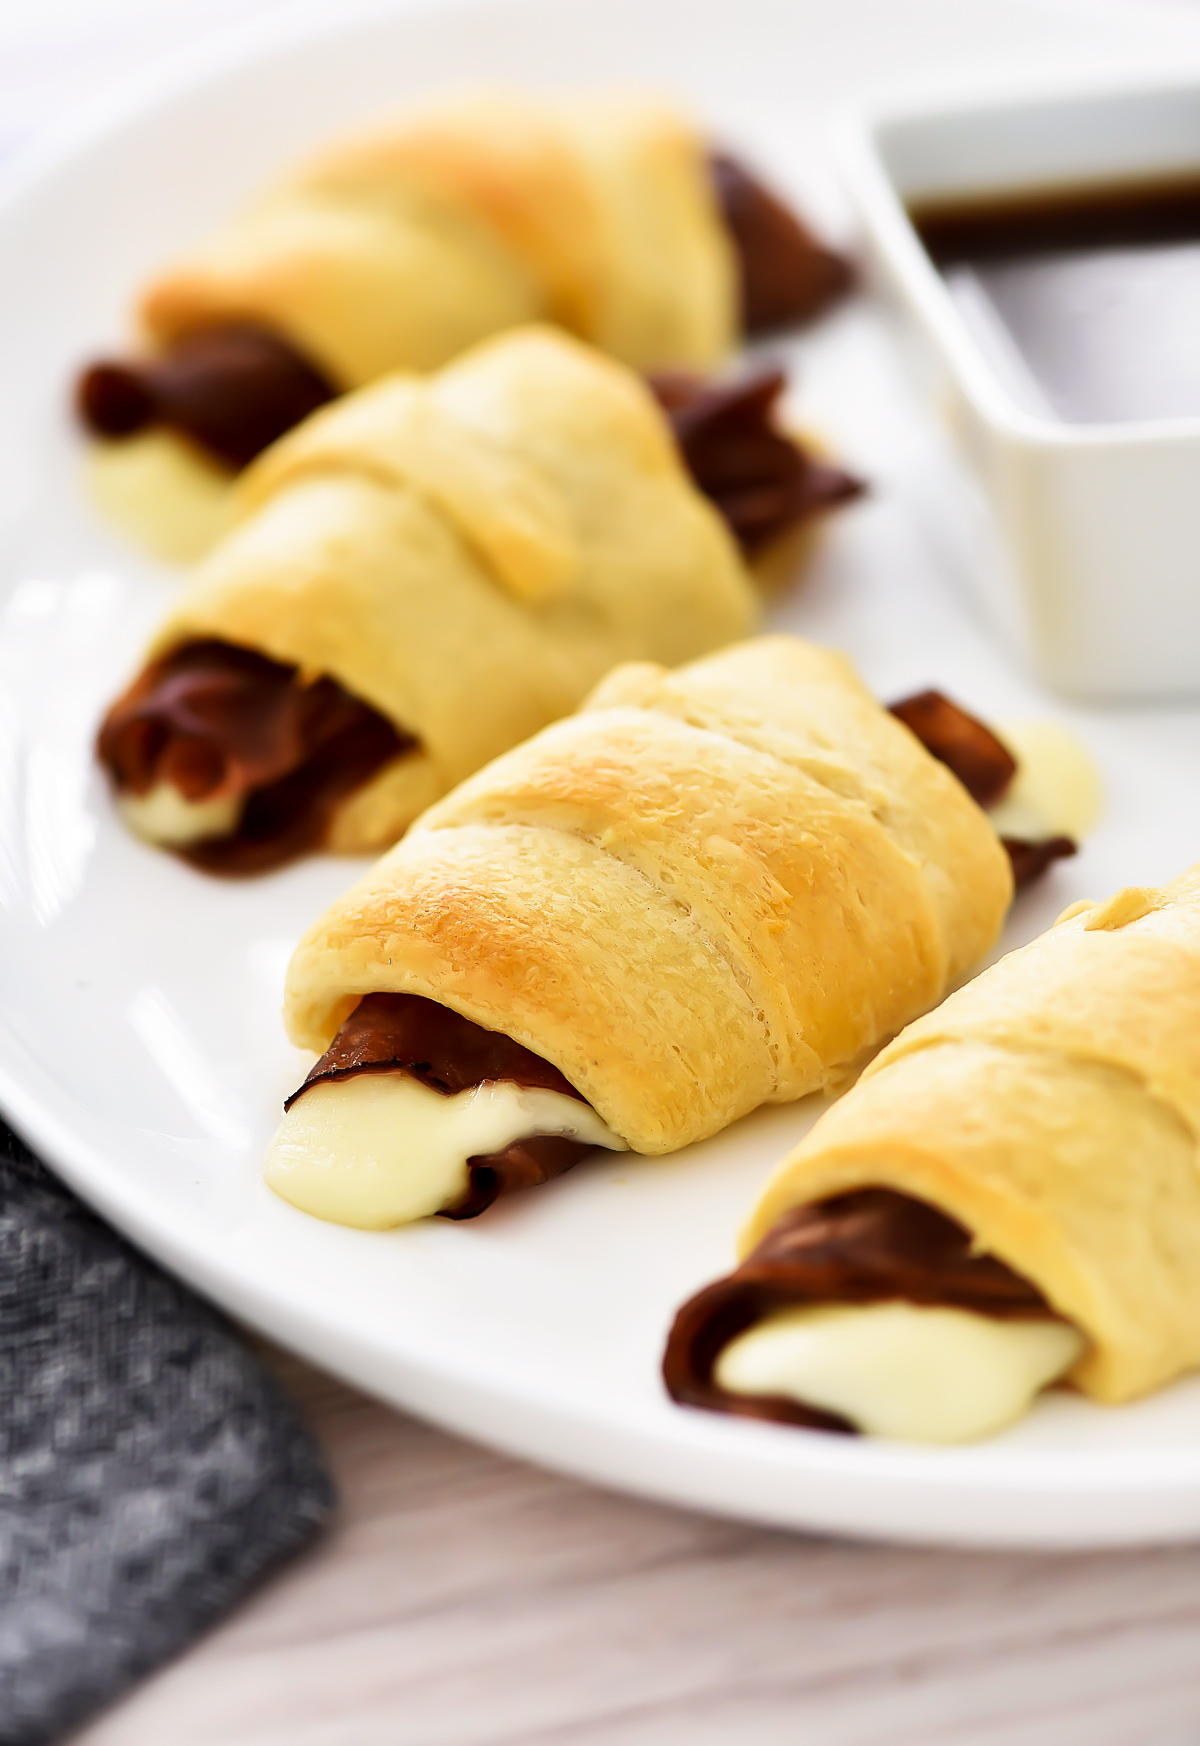 French Dip Crescents are savory little beef sandwiches filled with roast beef and cheese inside golden crescent rolls.